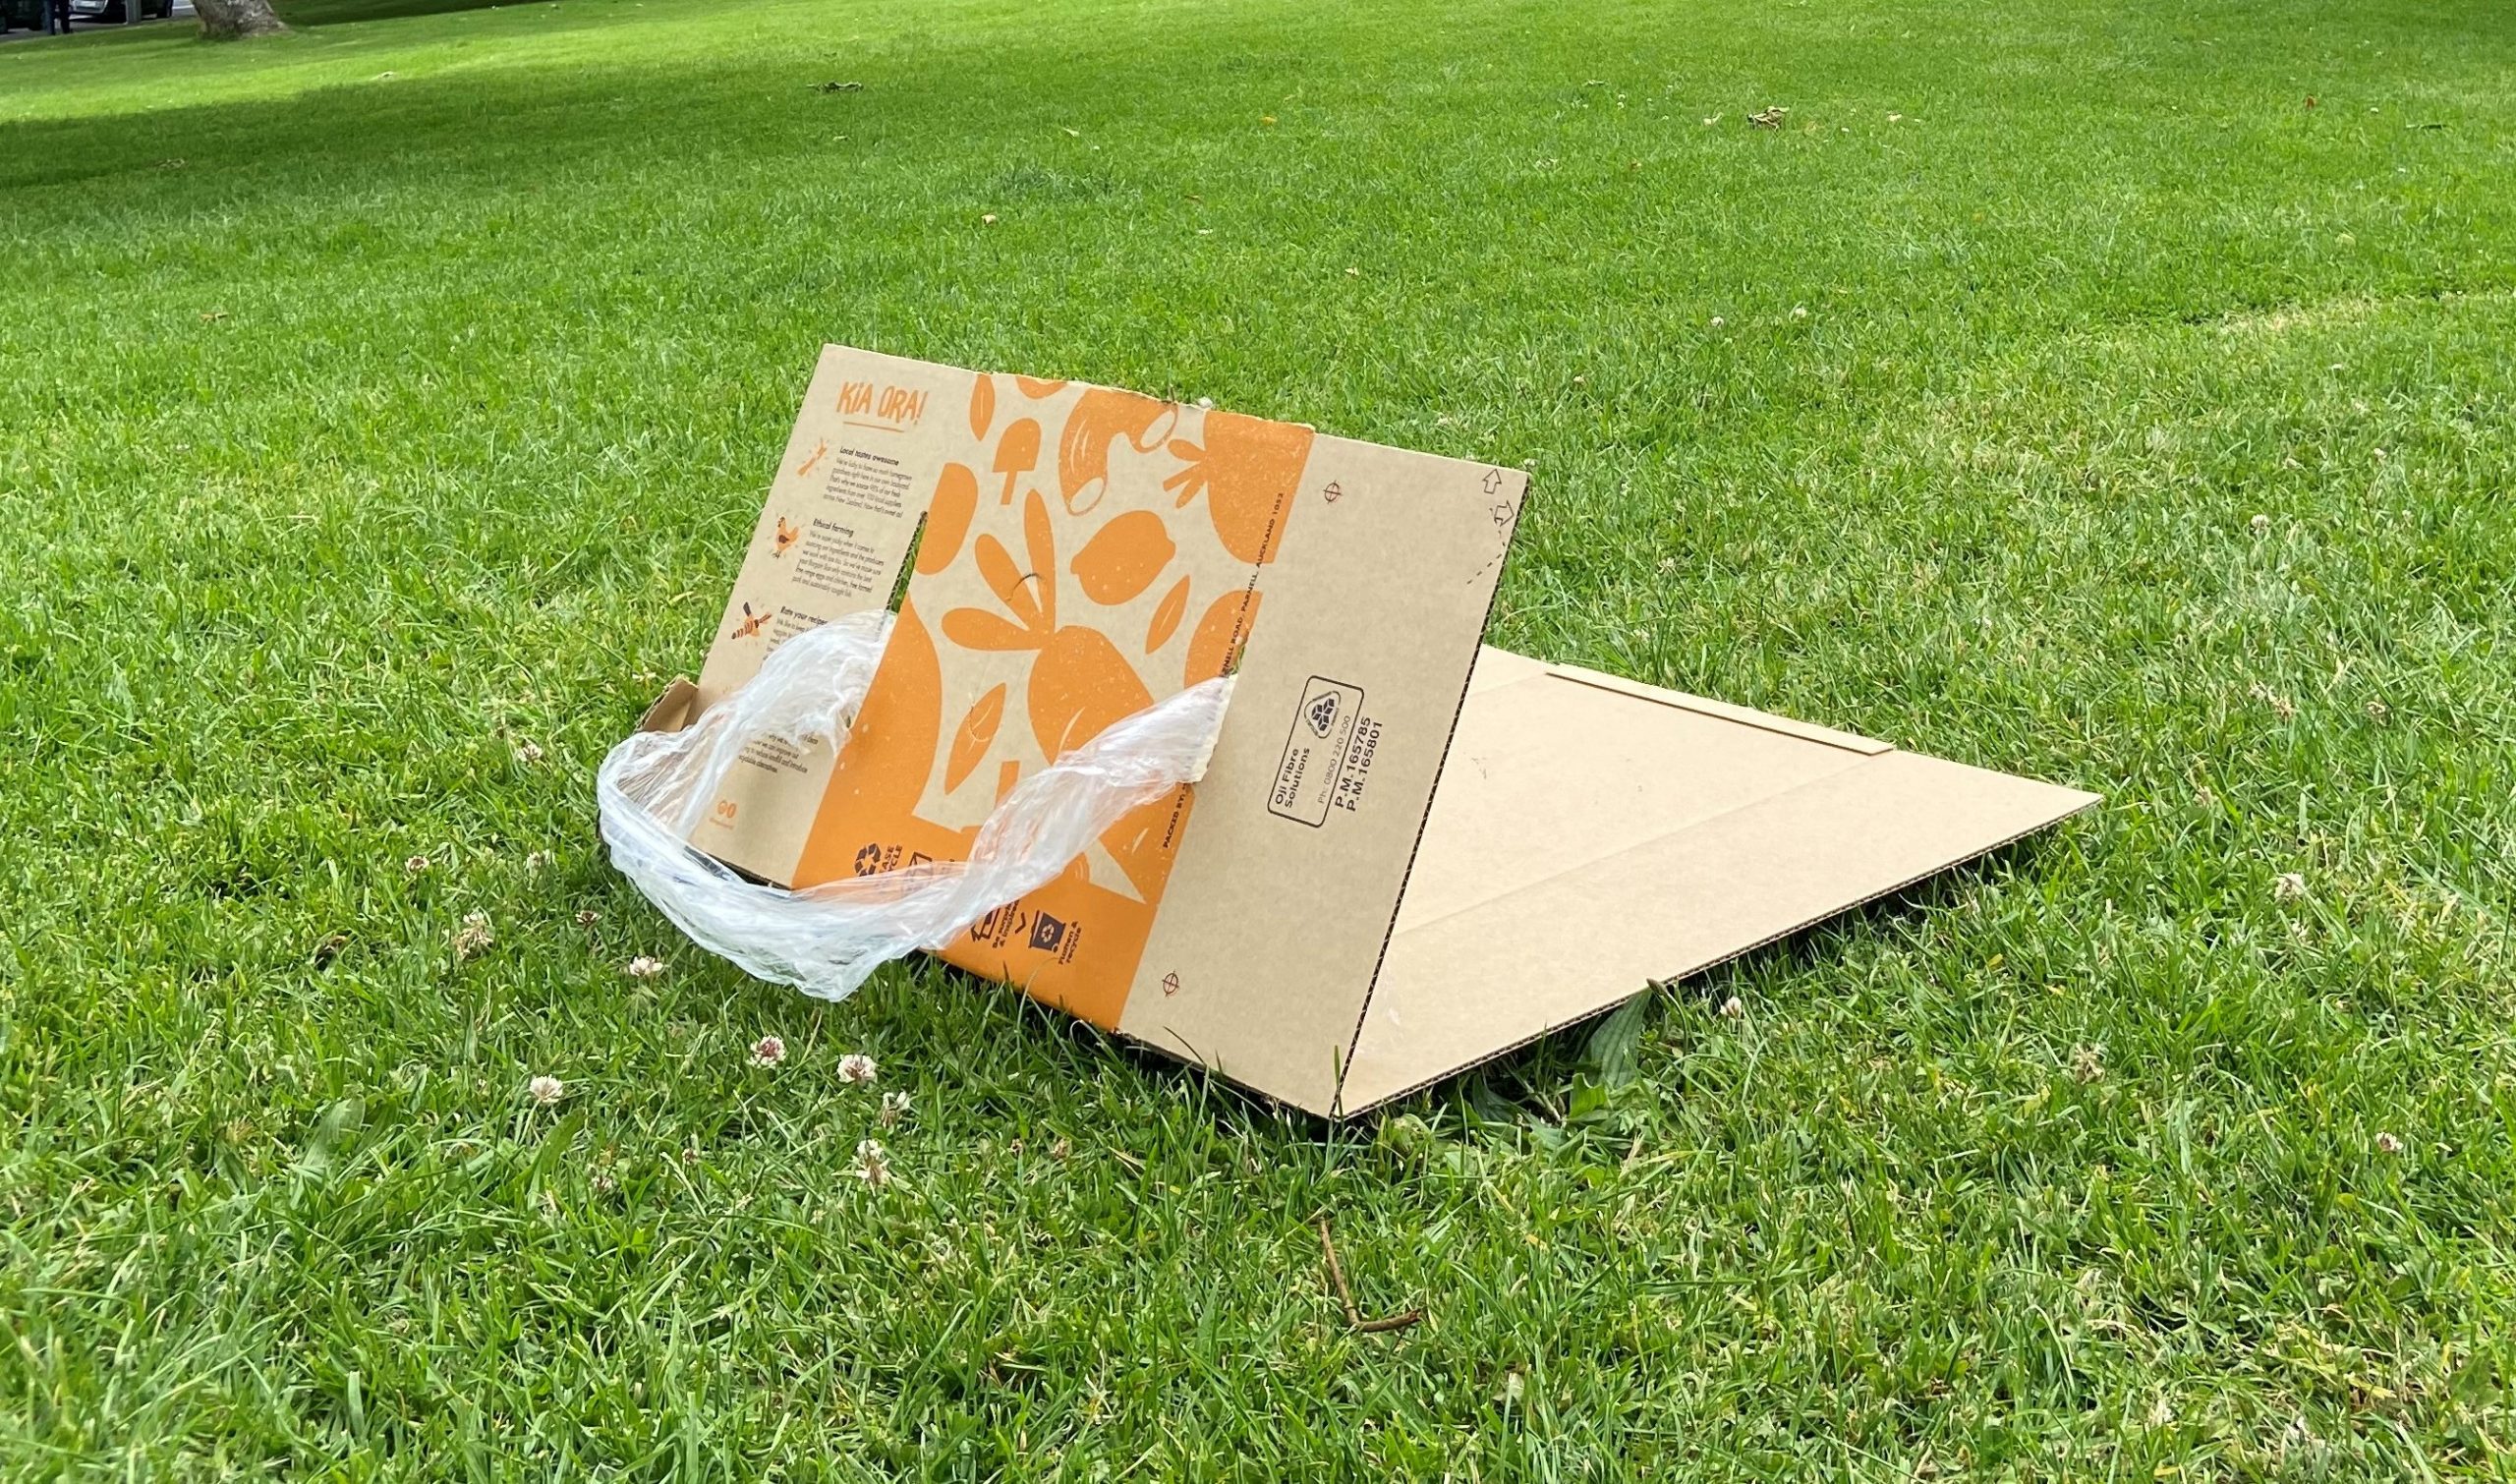 A grass sled made from a Bargain Box.